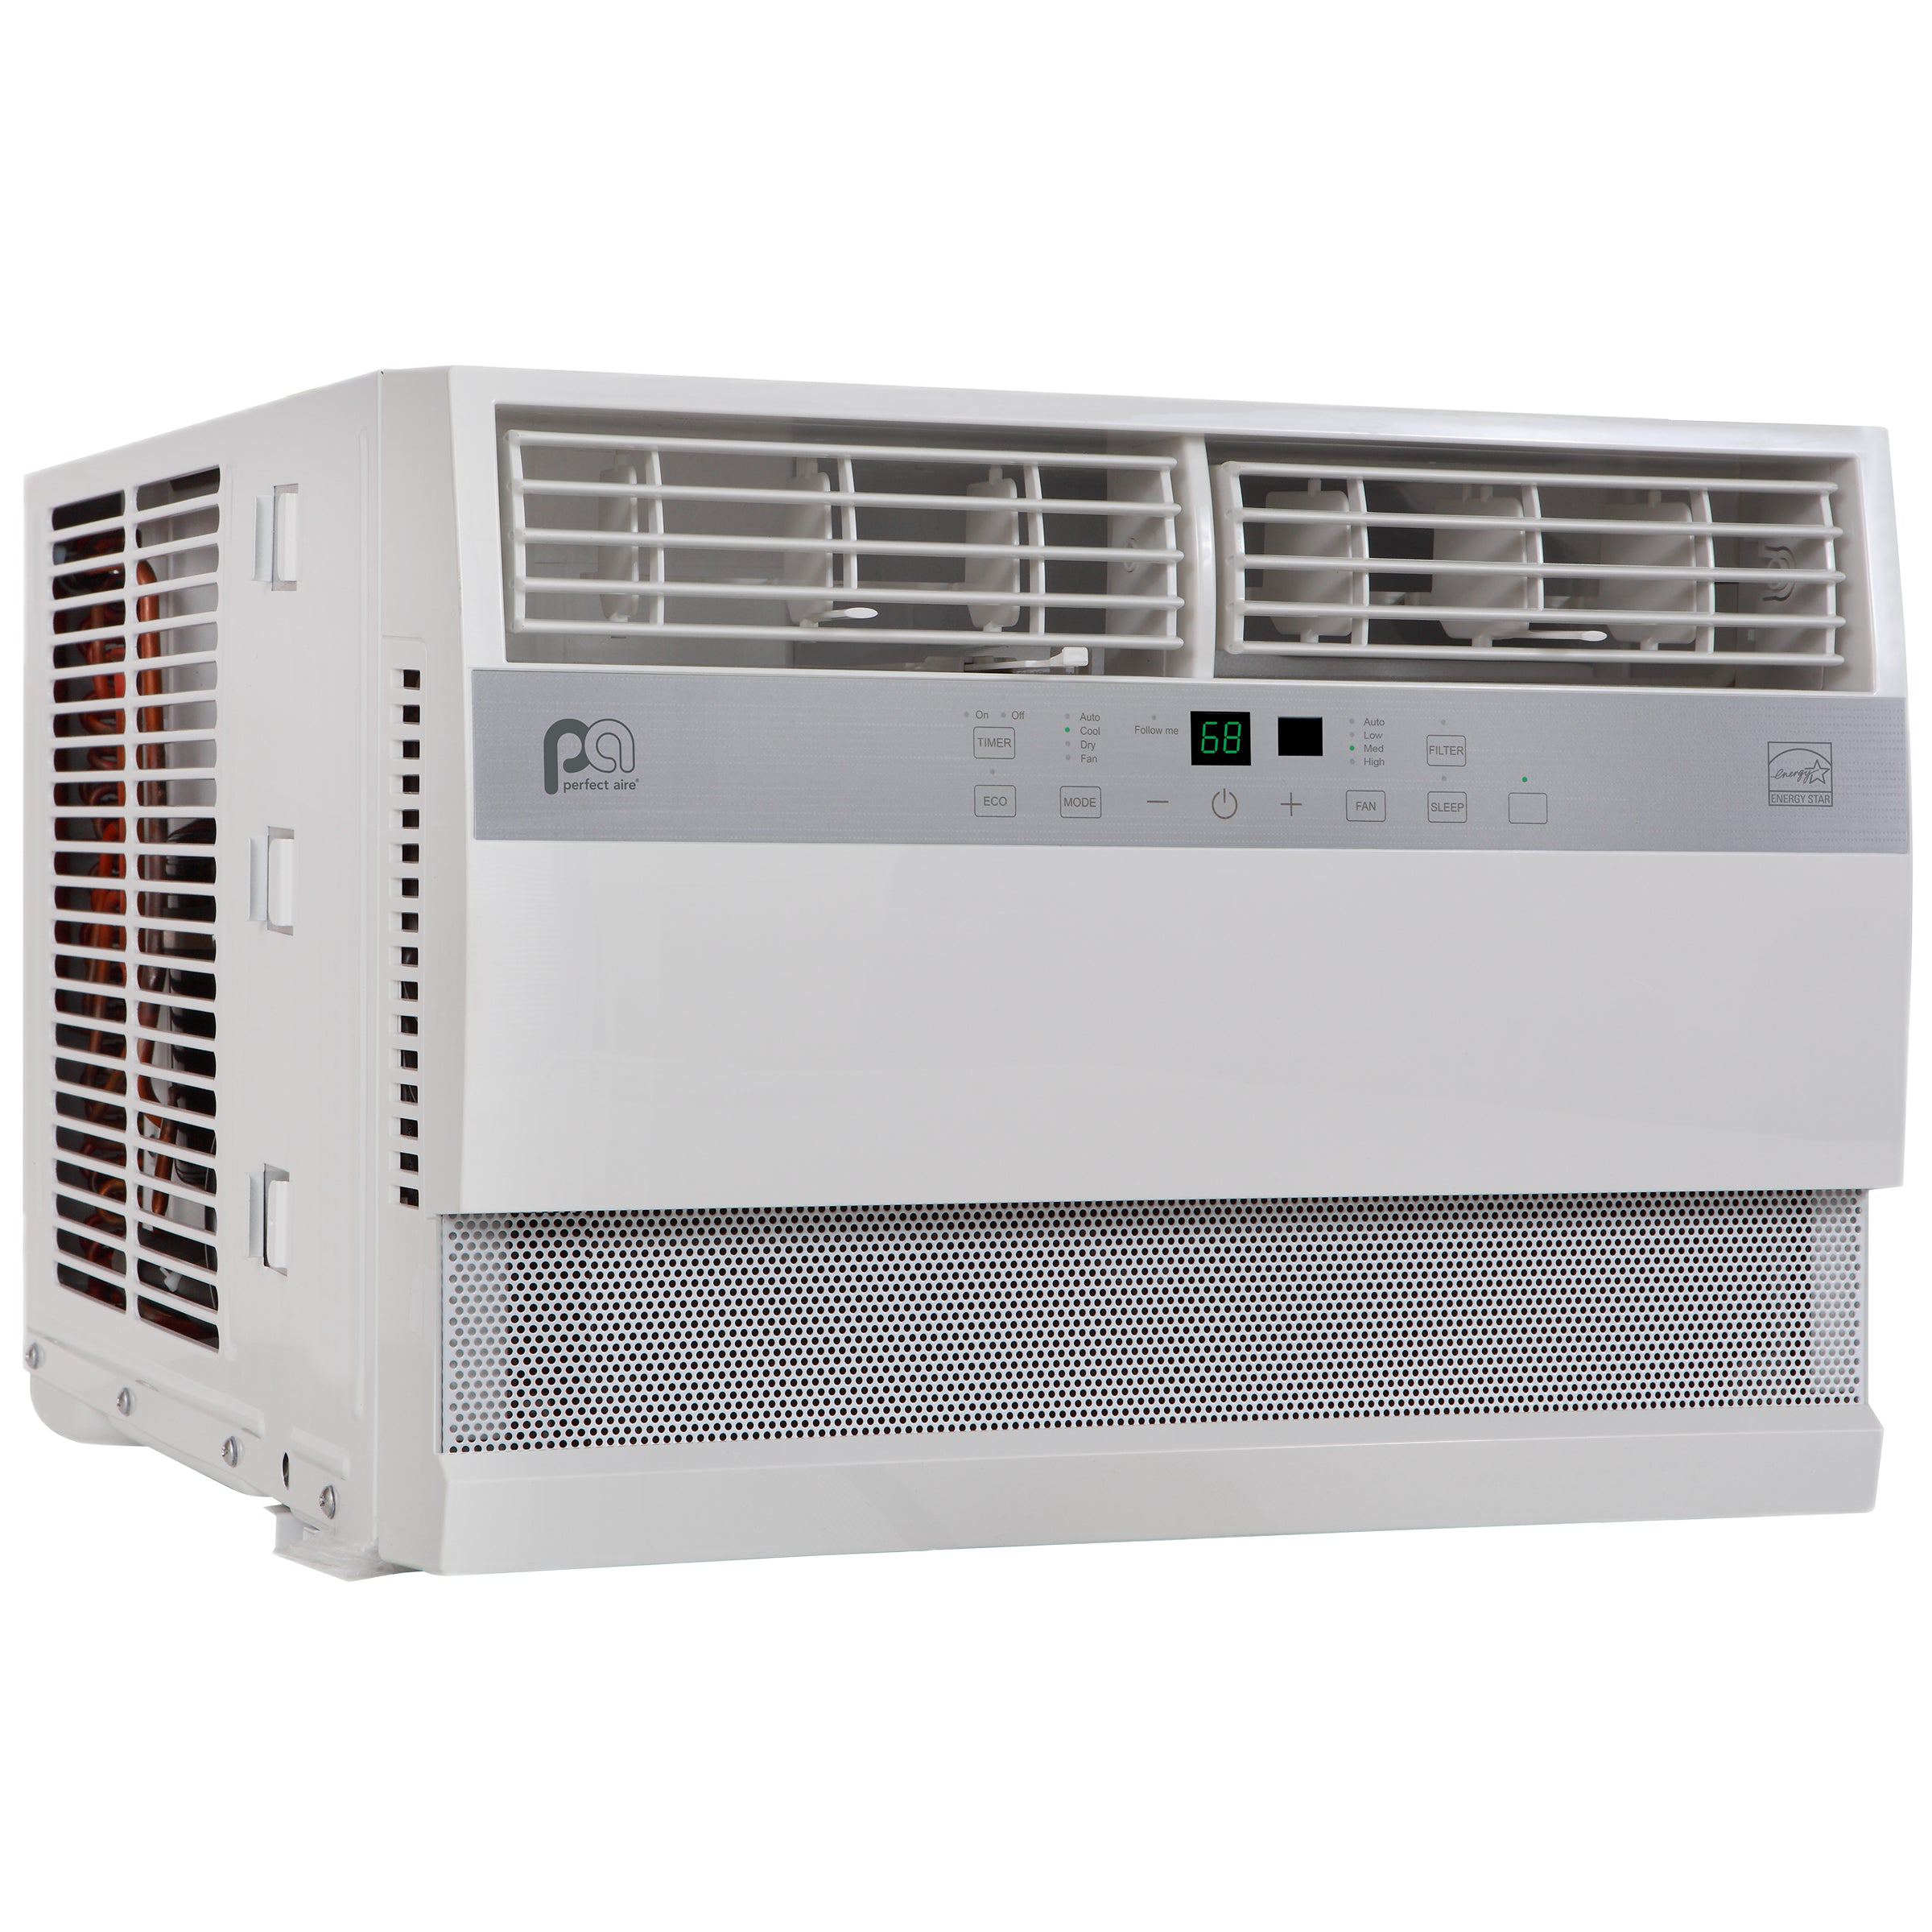 6PAC12000 Perfect Aire 12,000 BTU Flat Panel Window Room Air Conditioner, Sq. ft: 450-550 Coverage, With Remote Control